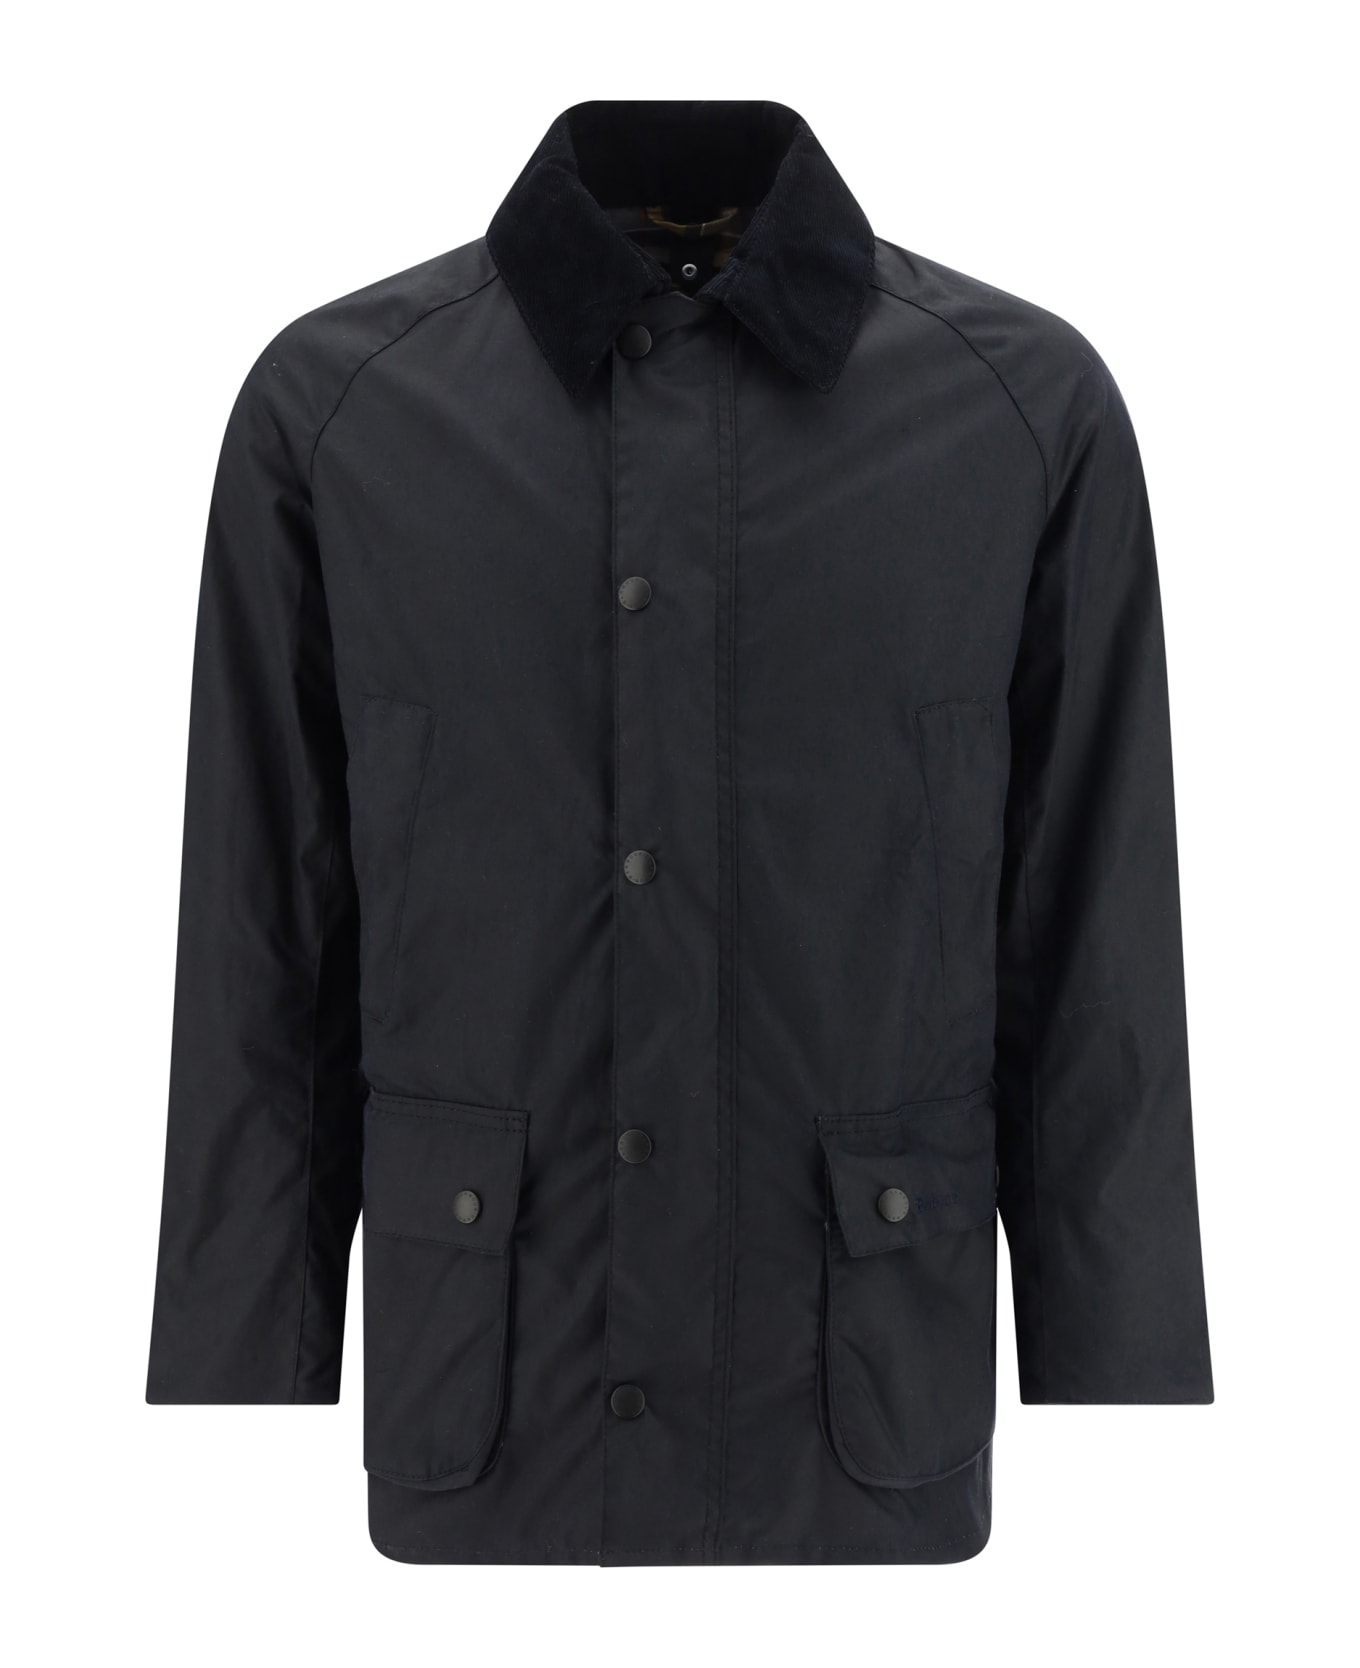 Barbour Ashby Jacket - Navy